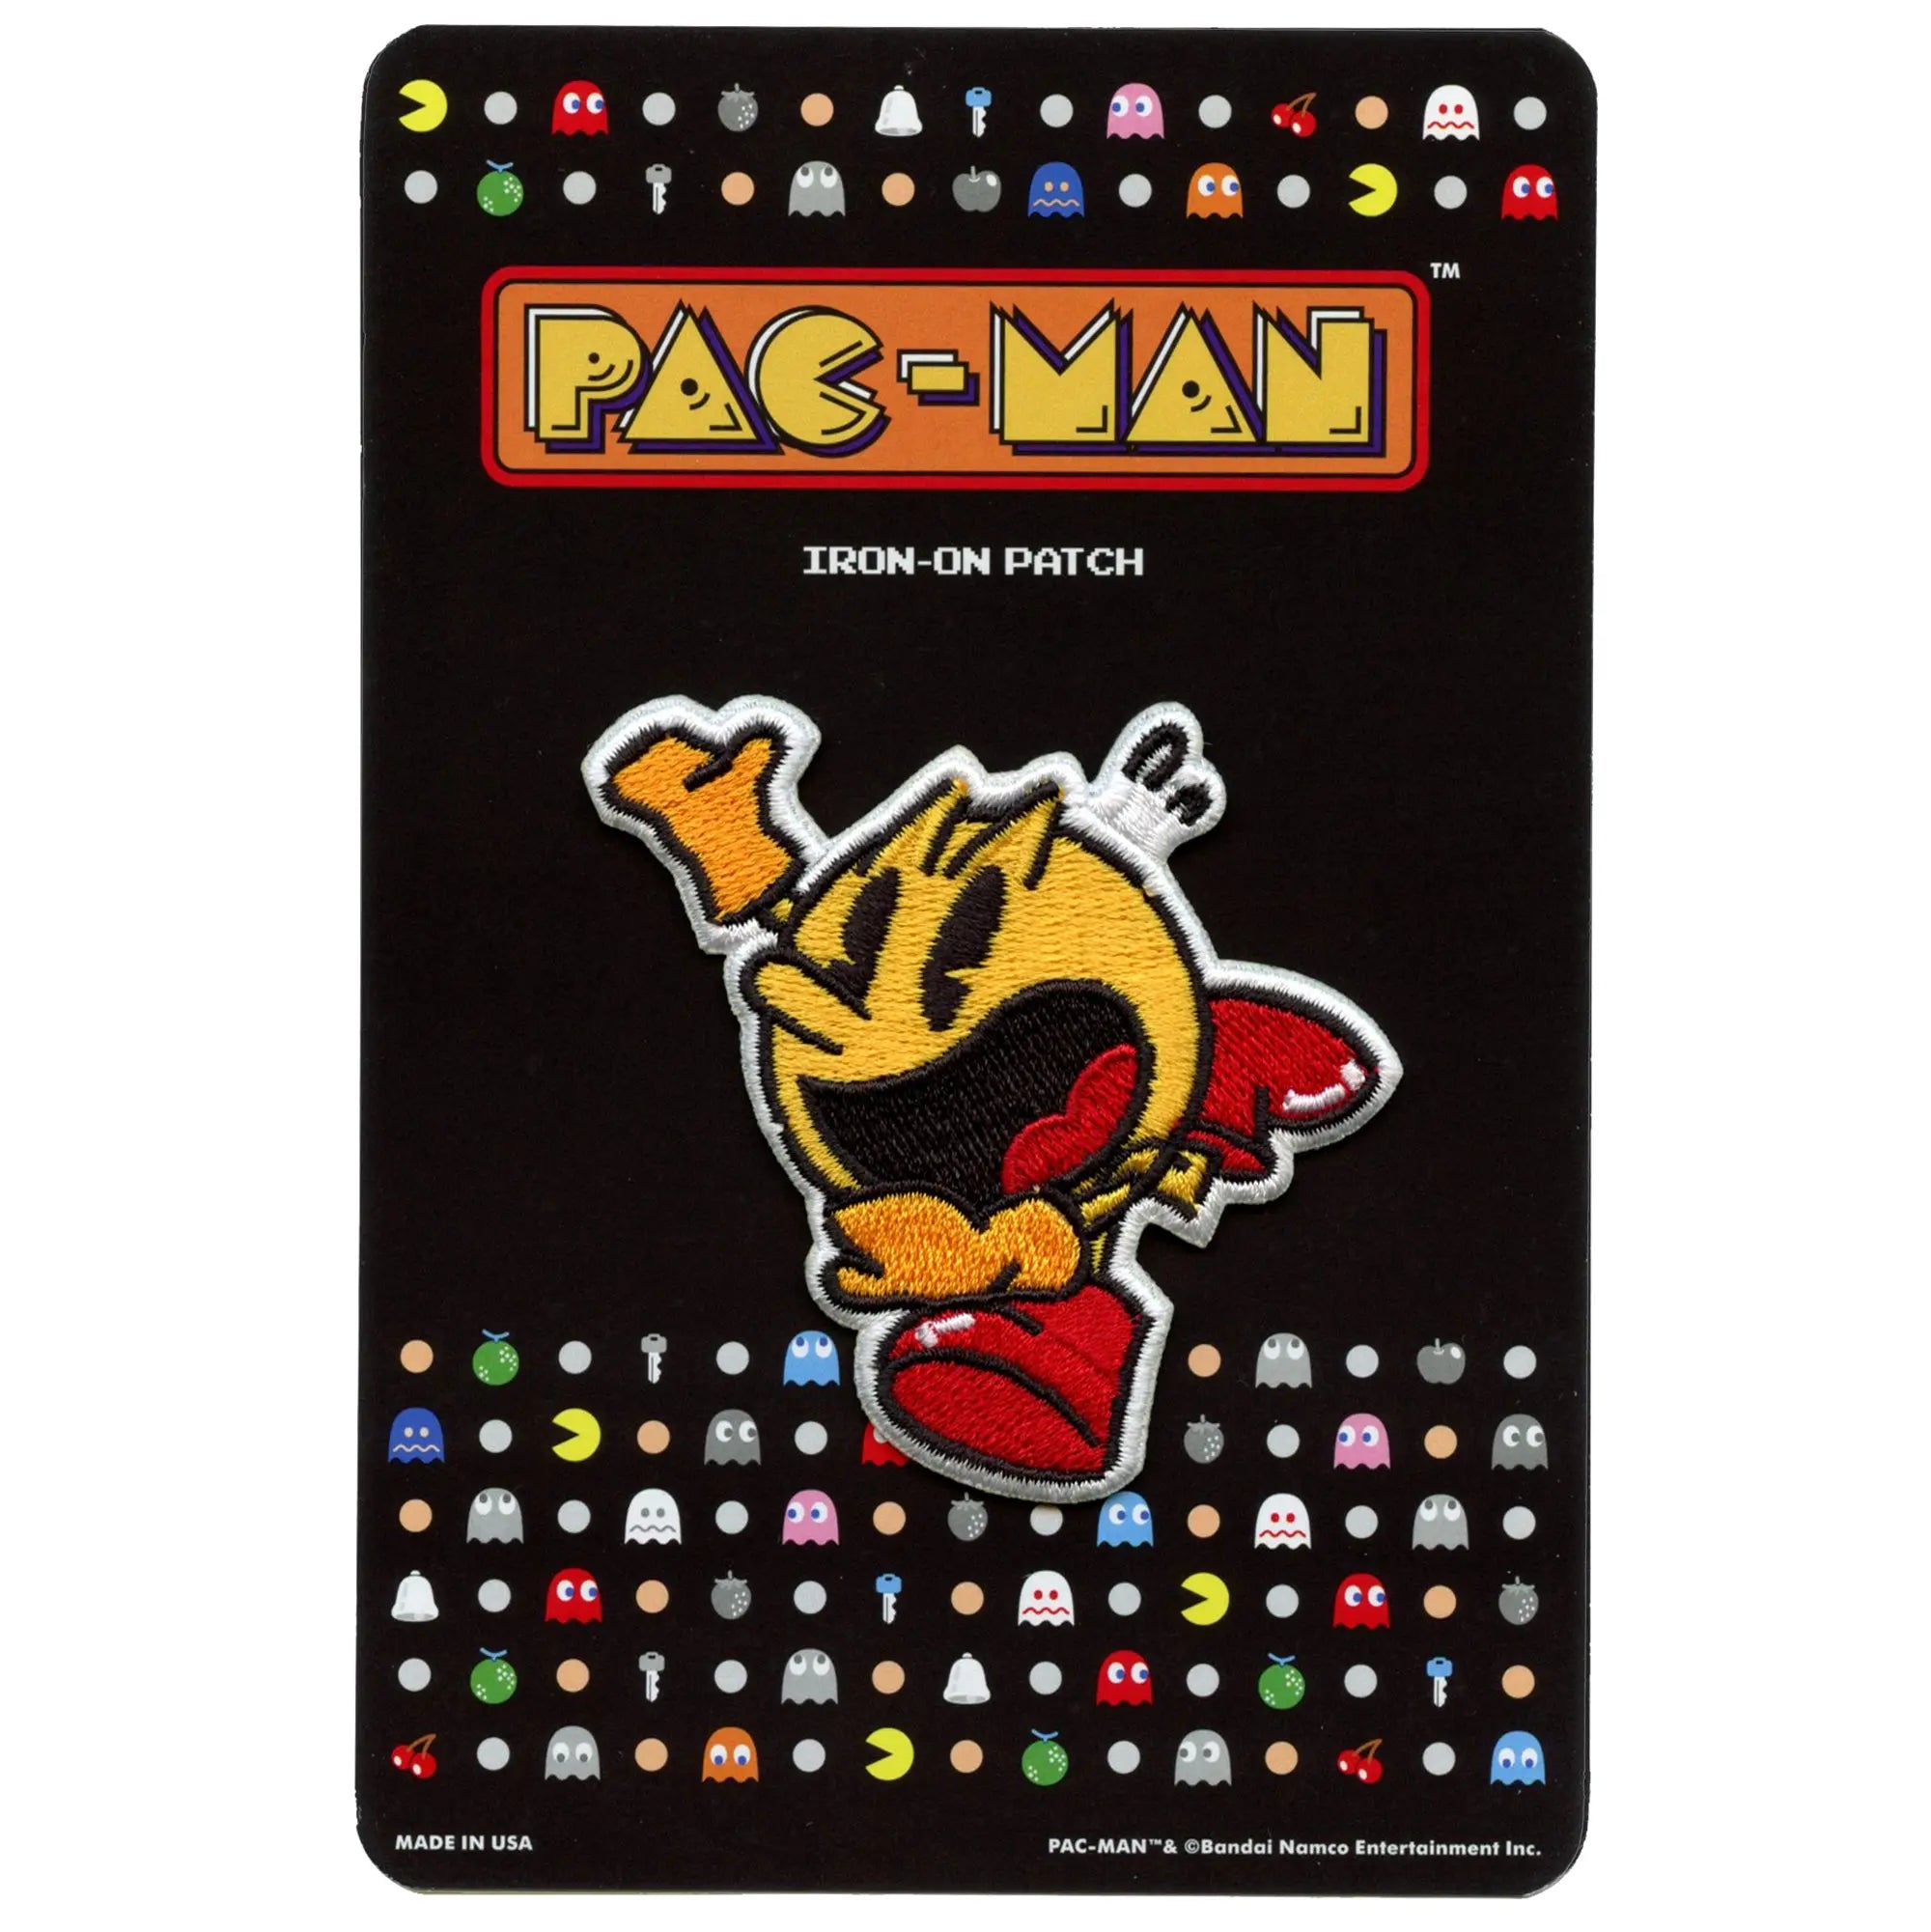 Pac-Man' embraces mobile with an endless running game